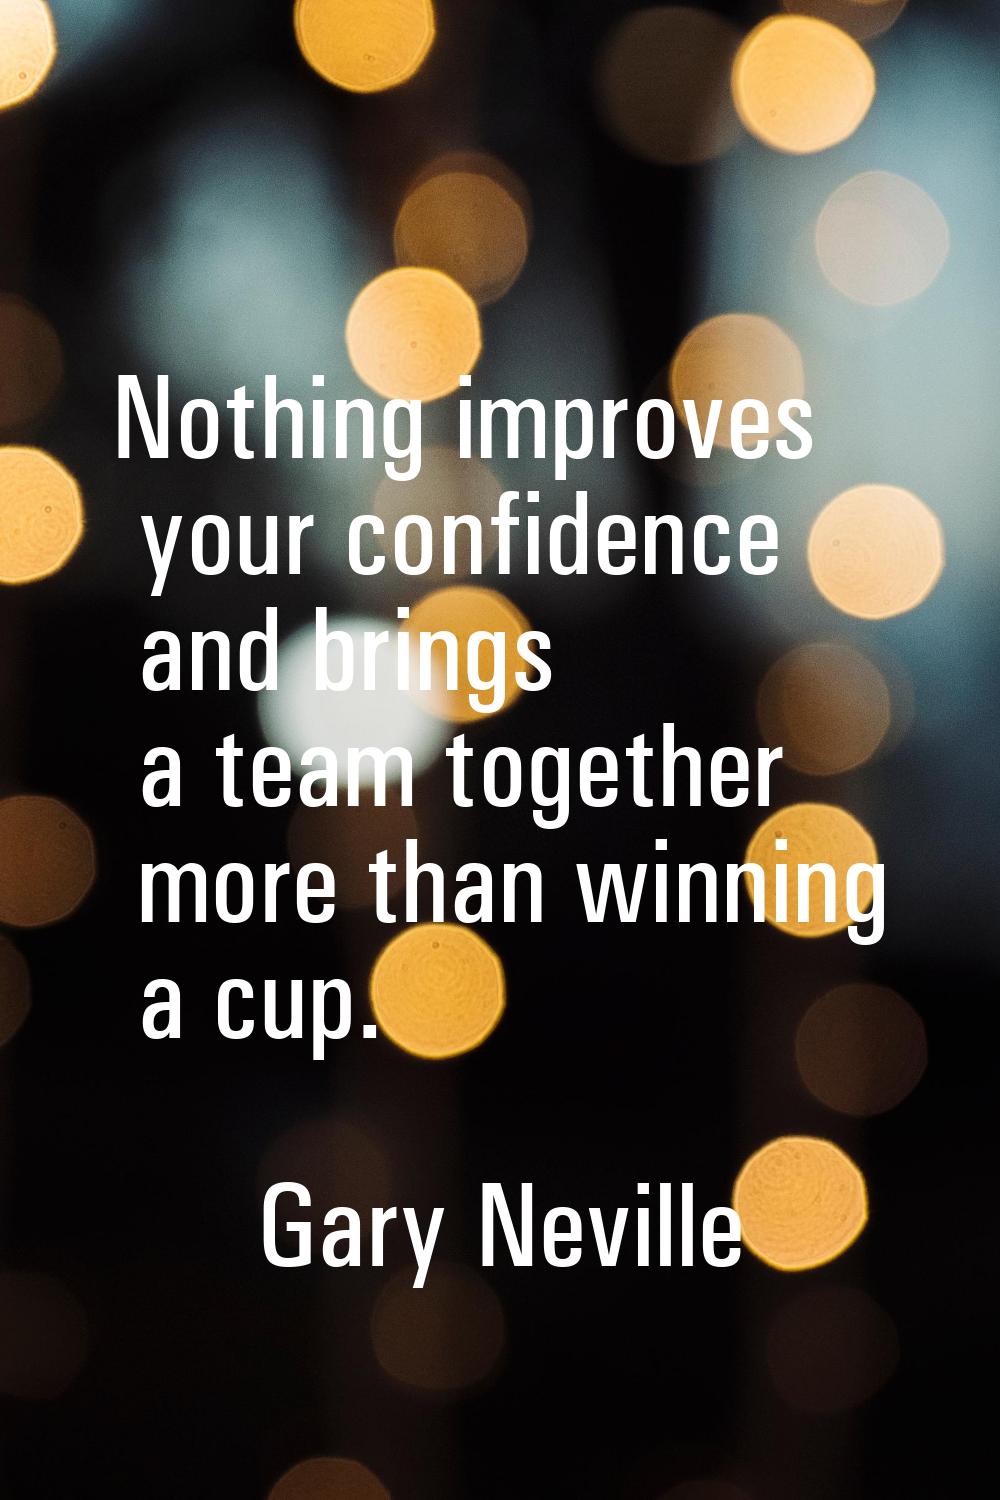 Nothing improves your confidence and brings a team together more than winning a cup.